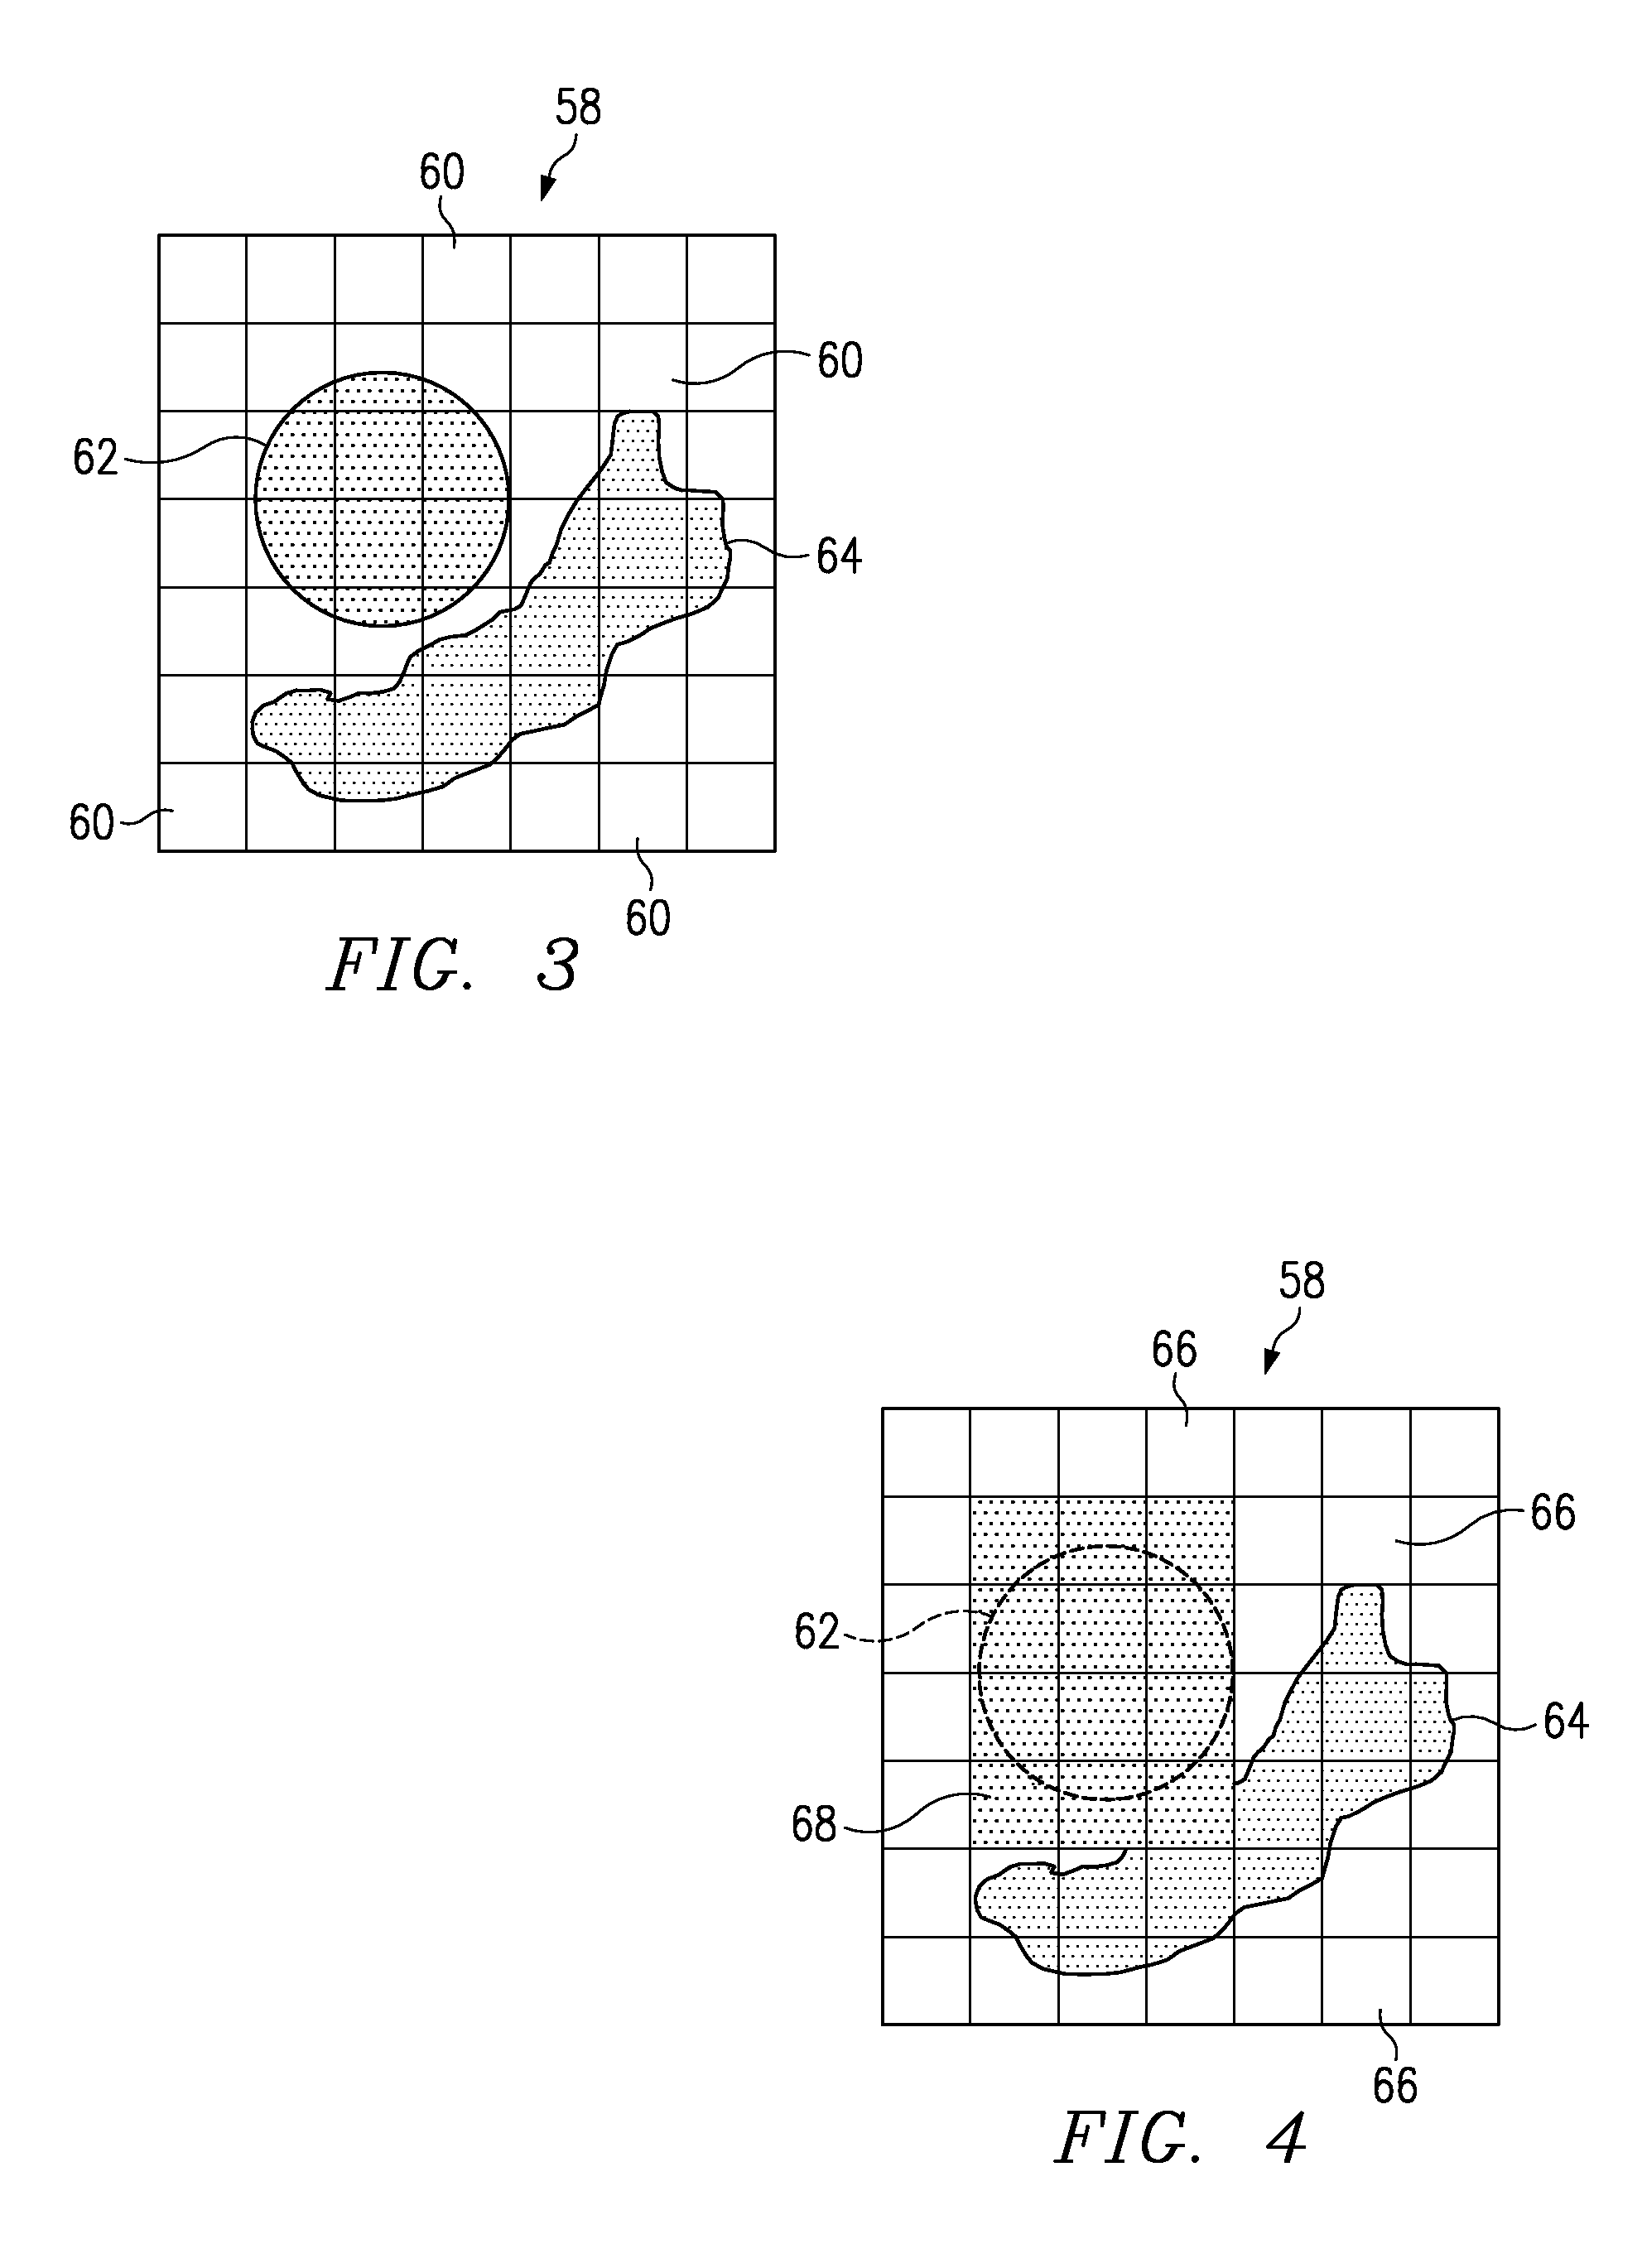 System and Method for Varying Exposure Time for Different Parts of a Field of View While Acquiring an Image